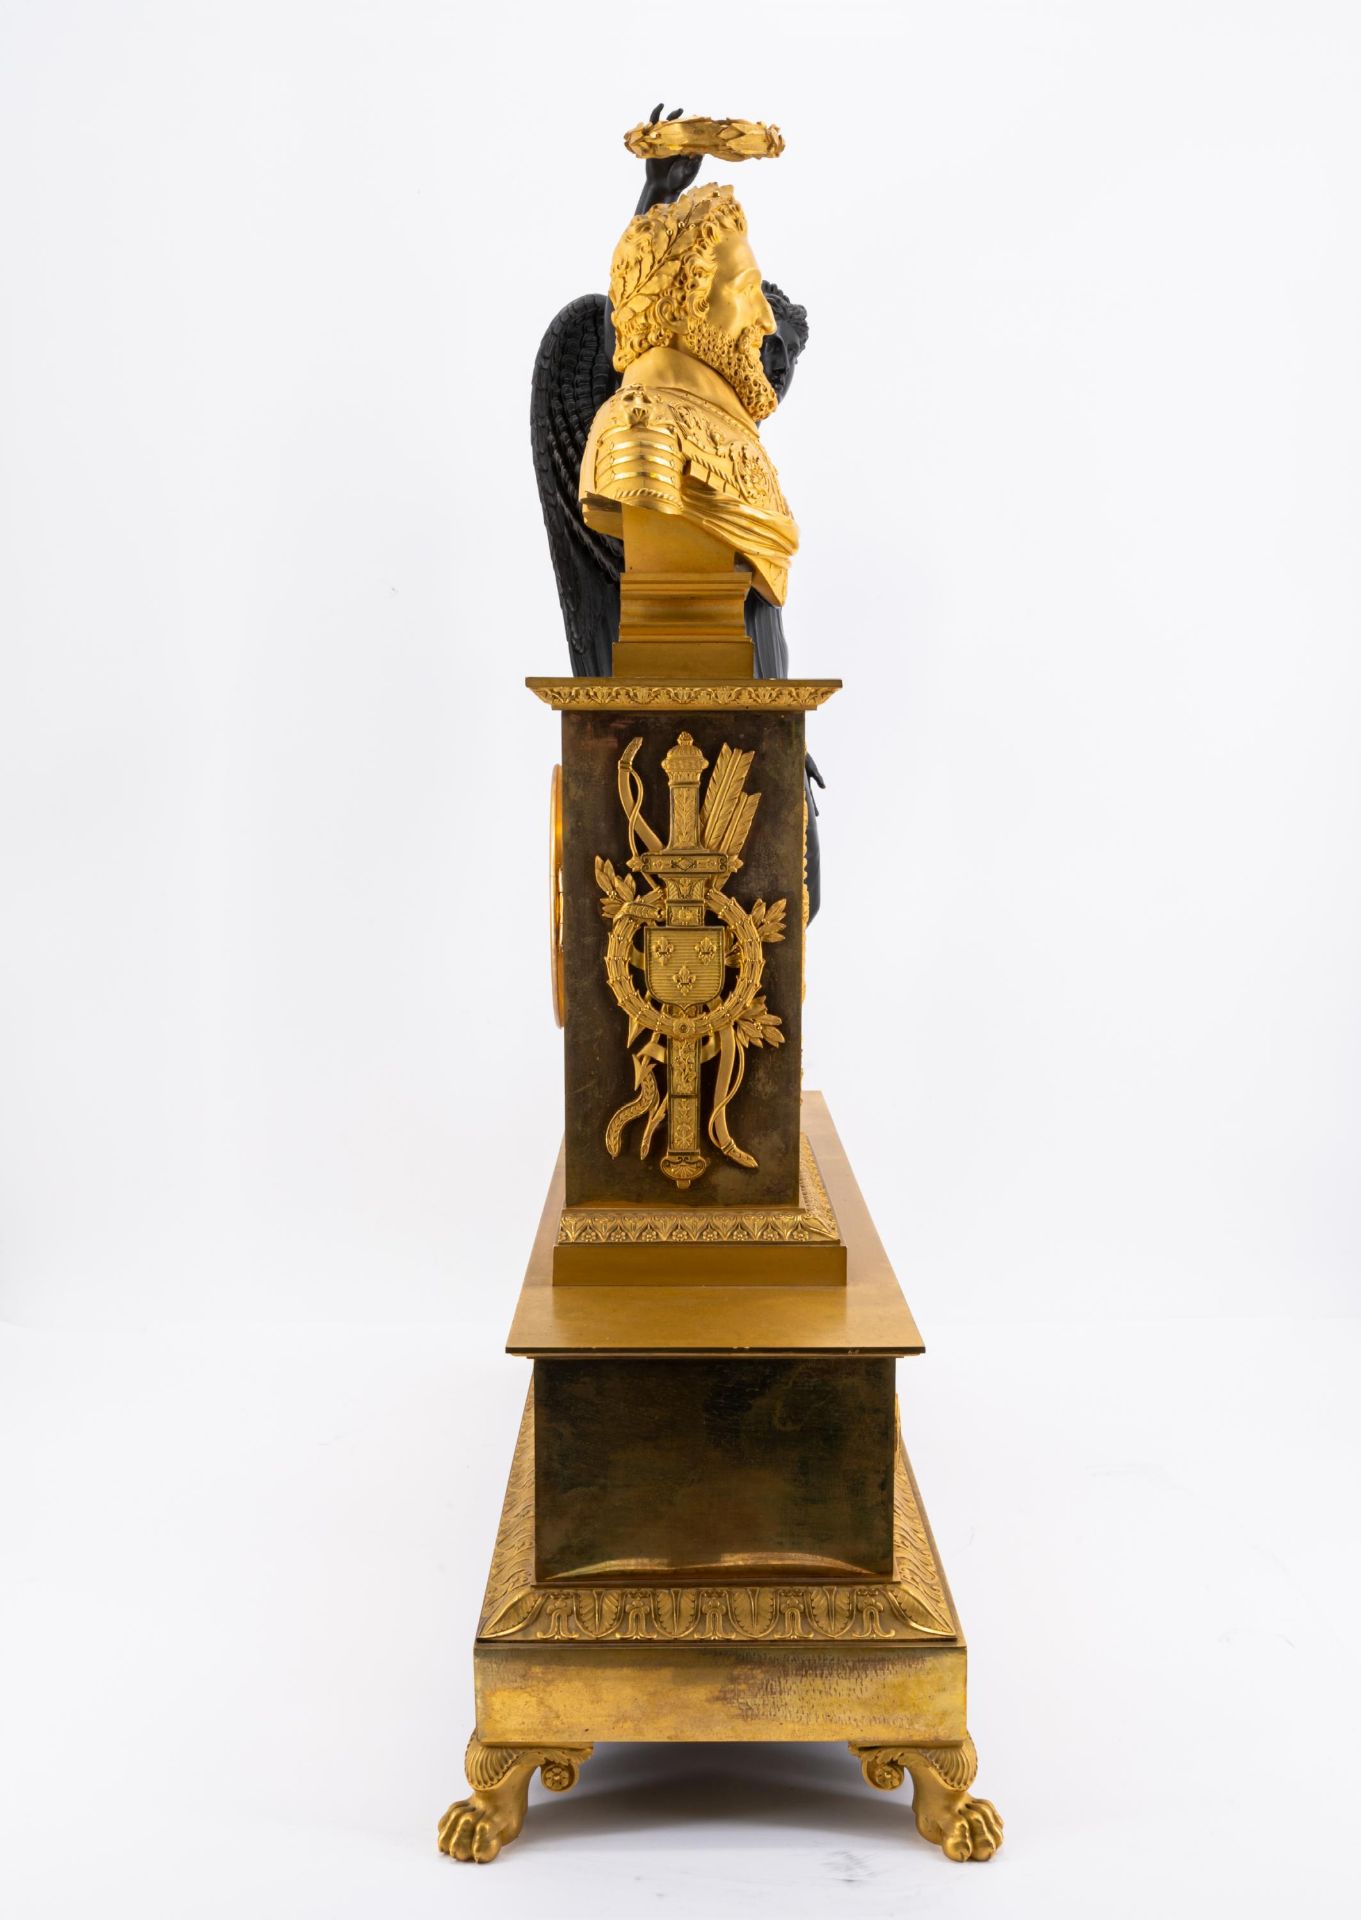 BRONZE MONUMENTAL PENDULUM CLOCK WITH BUST OF HENRY IV AND VICTORIA - Image 4 of 5